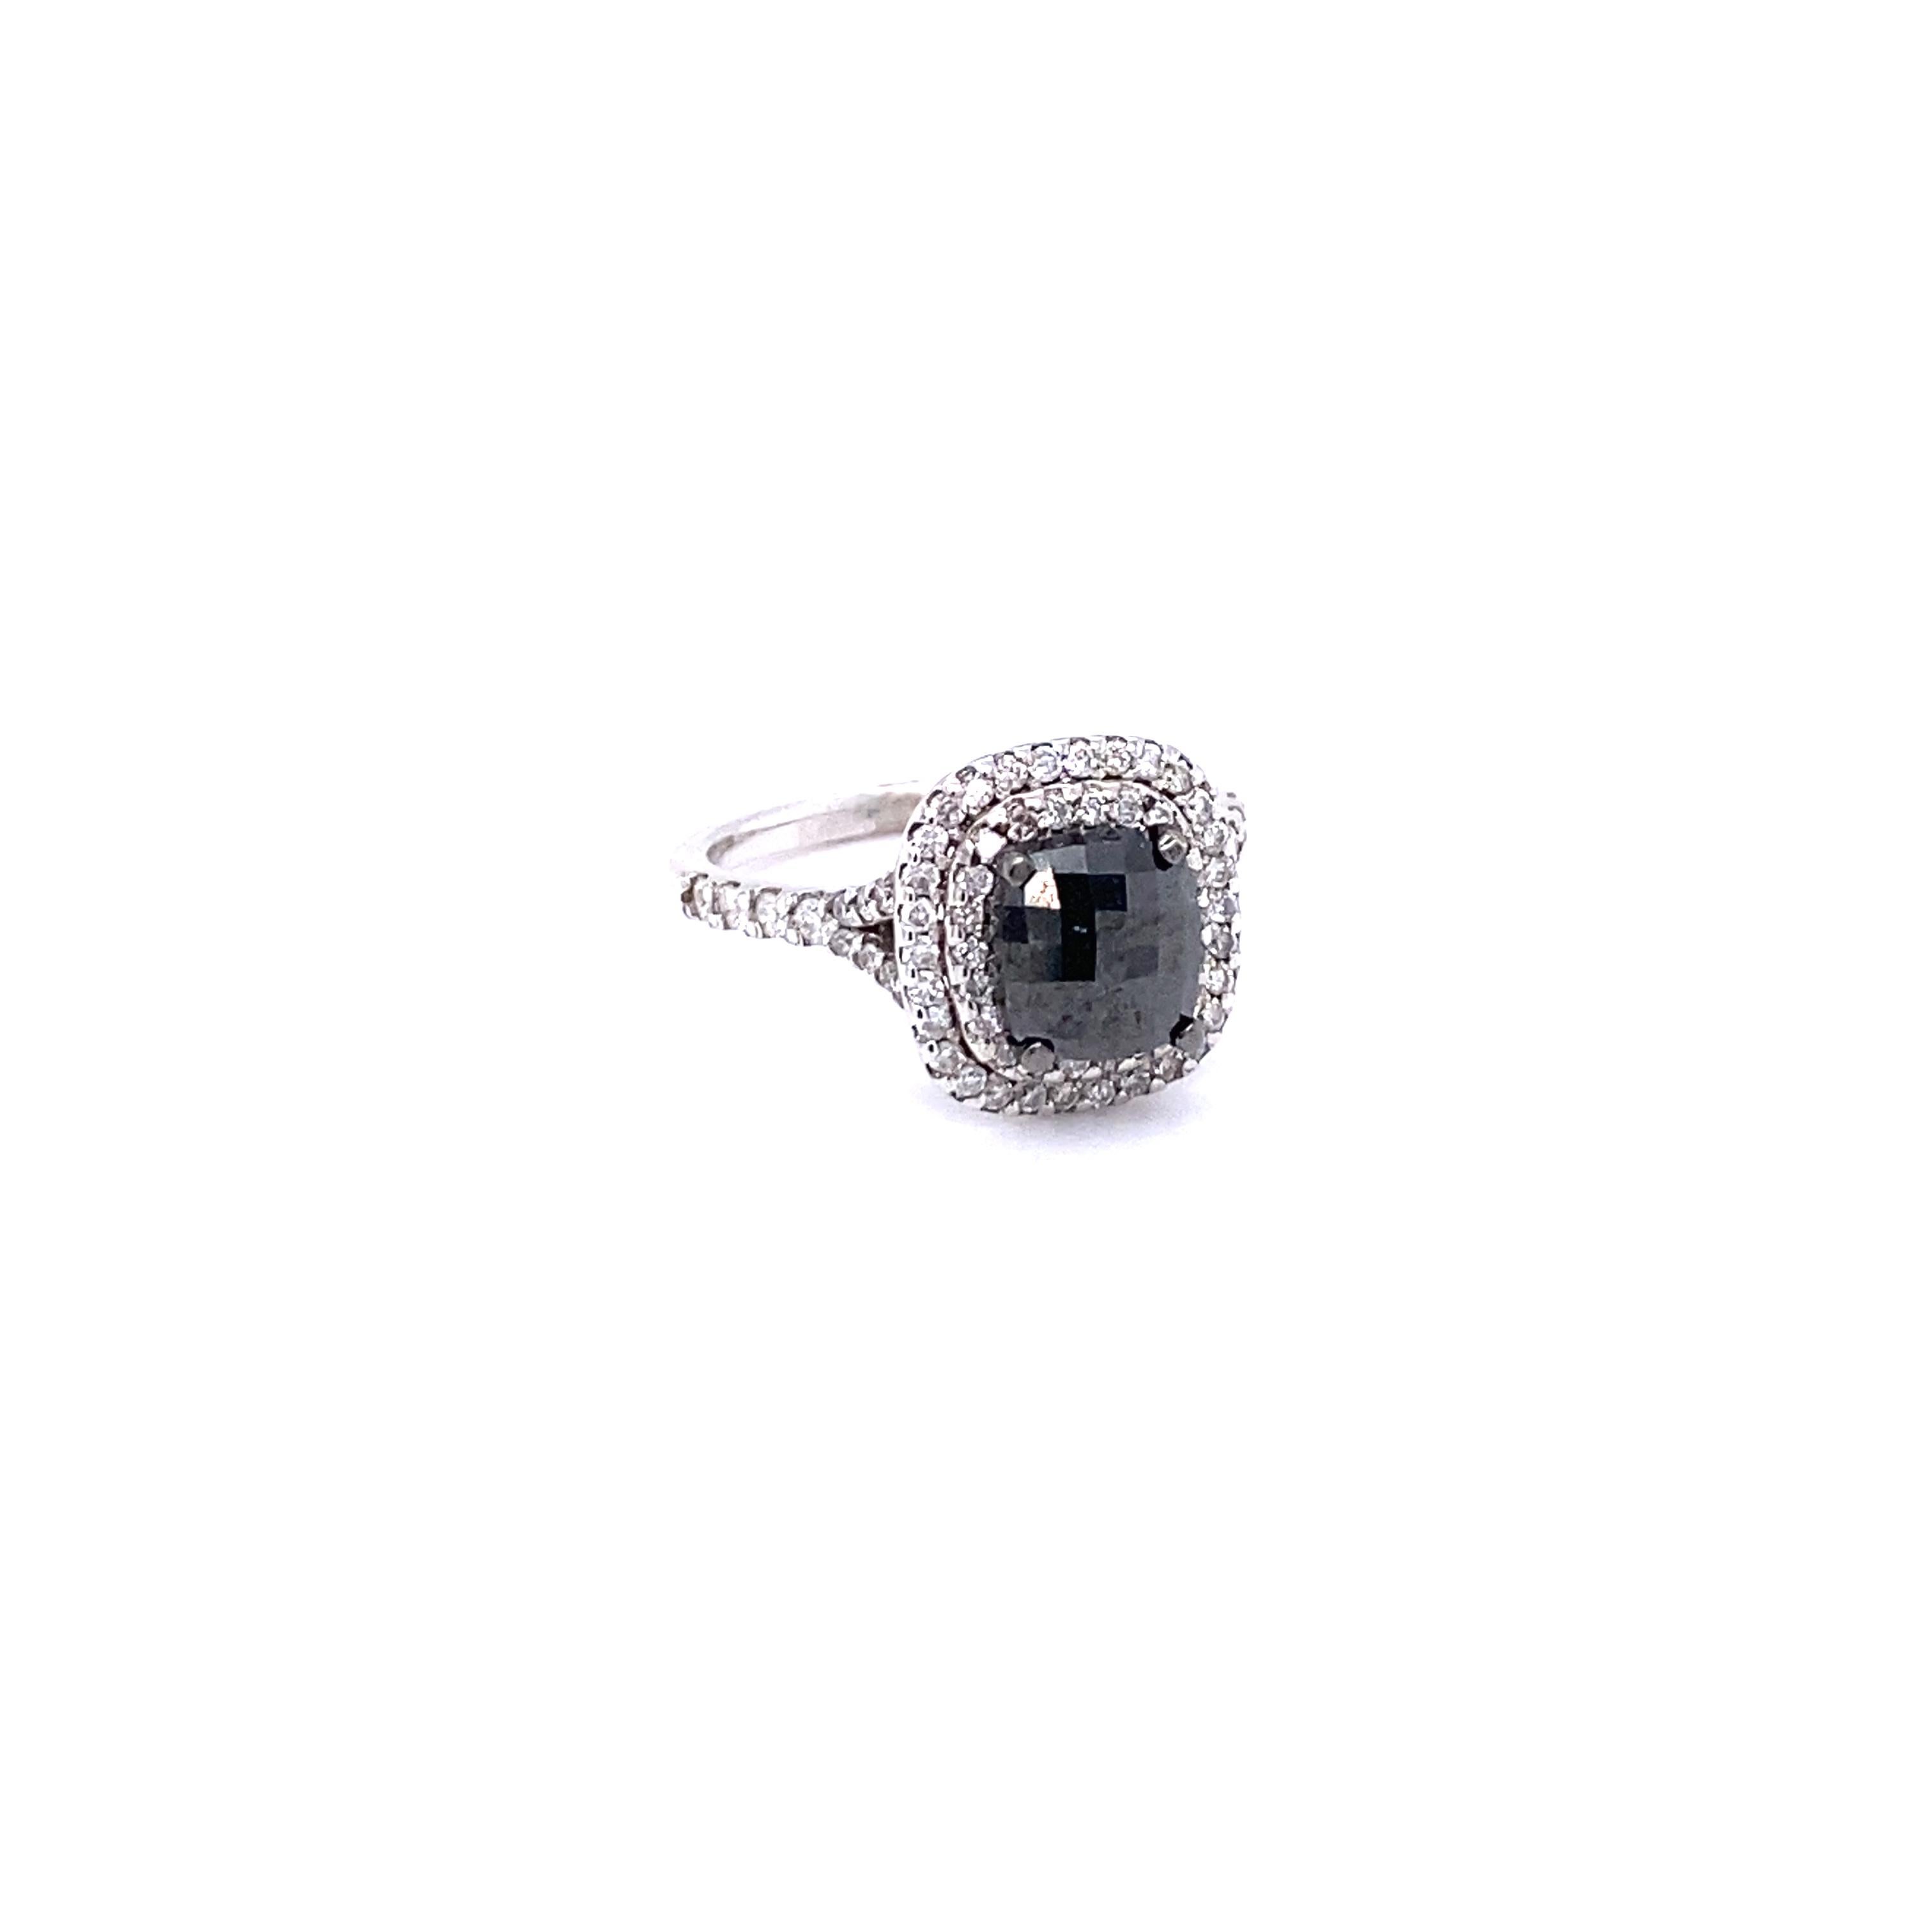 Stunning Cushion Cut Black and White Diamond Engagement Ring
Description as follows:

Cushion Cut Diamond = 1.86 carats
76 Round Cut Diamonds = 0.63 carats (Clarity: SI, Color: F)
14 Karat White Gold = 3.6 grams
Ring Size: 7 (complimentary ring